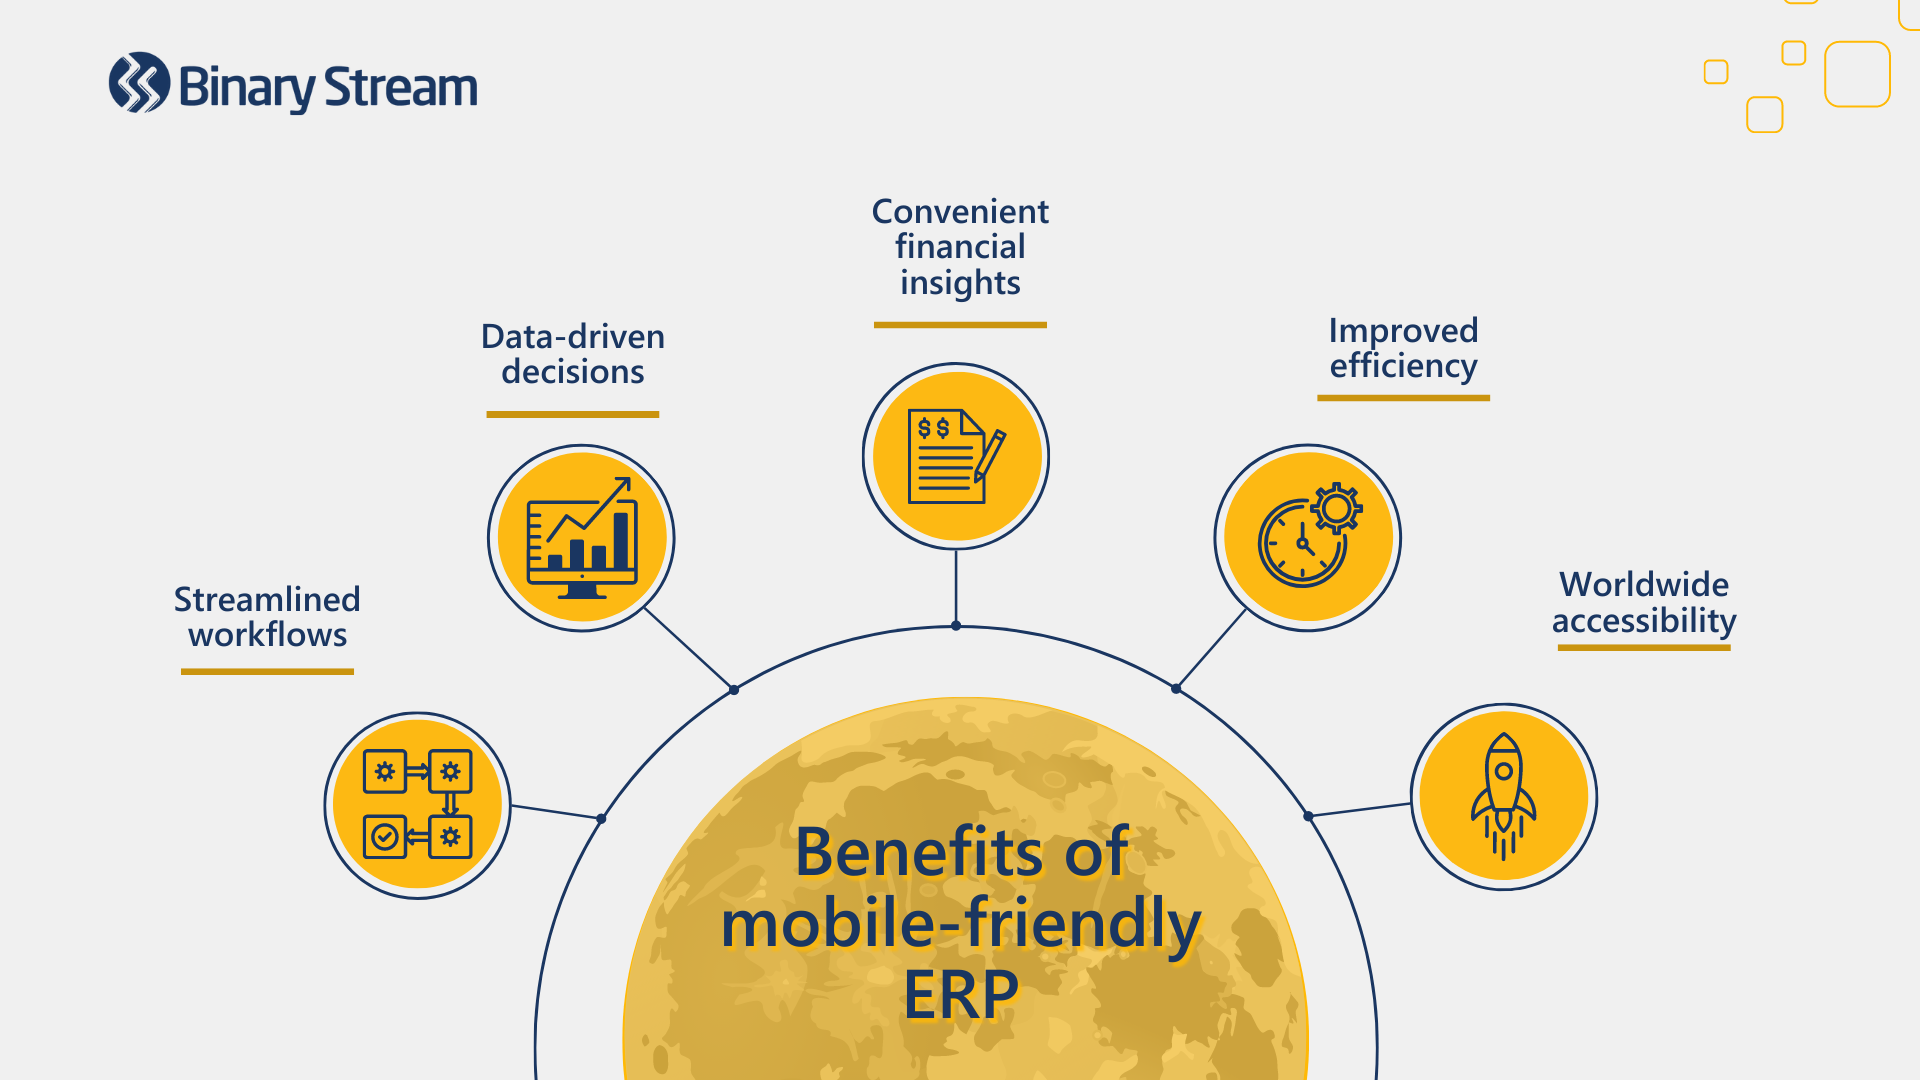  Benefits of mobile-friendly ERP